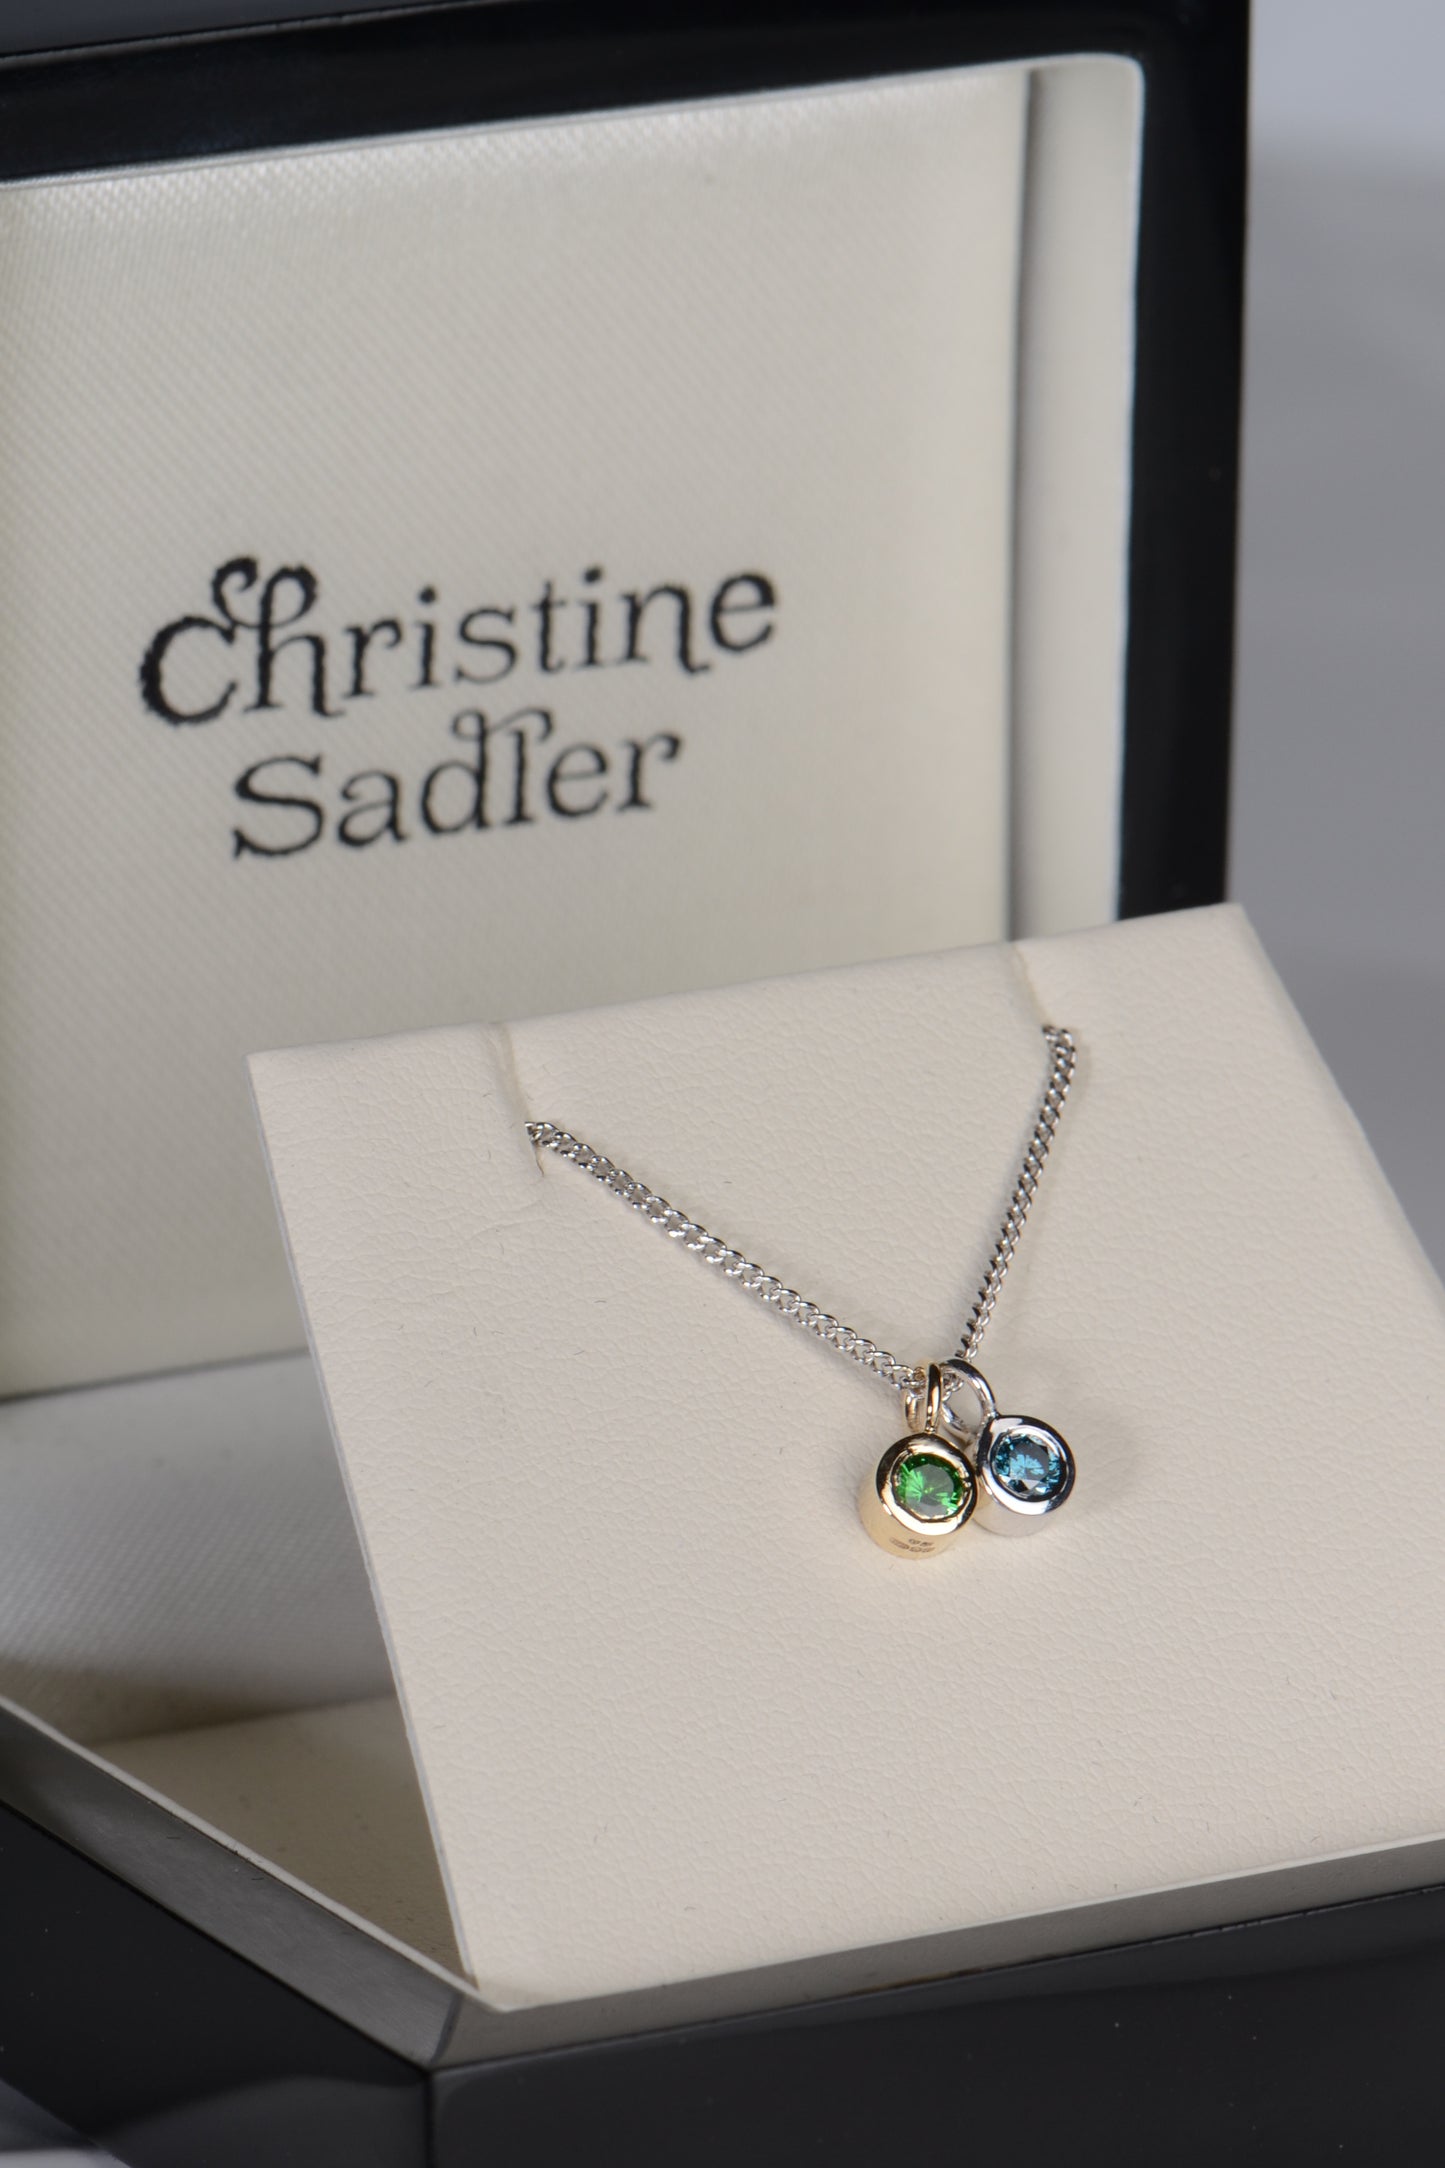 Cairn white gold blue diamond and green garnet necklace